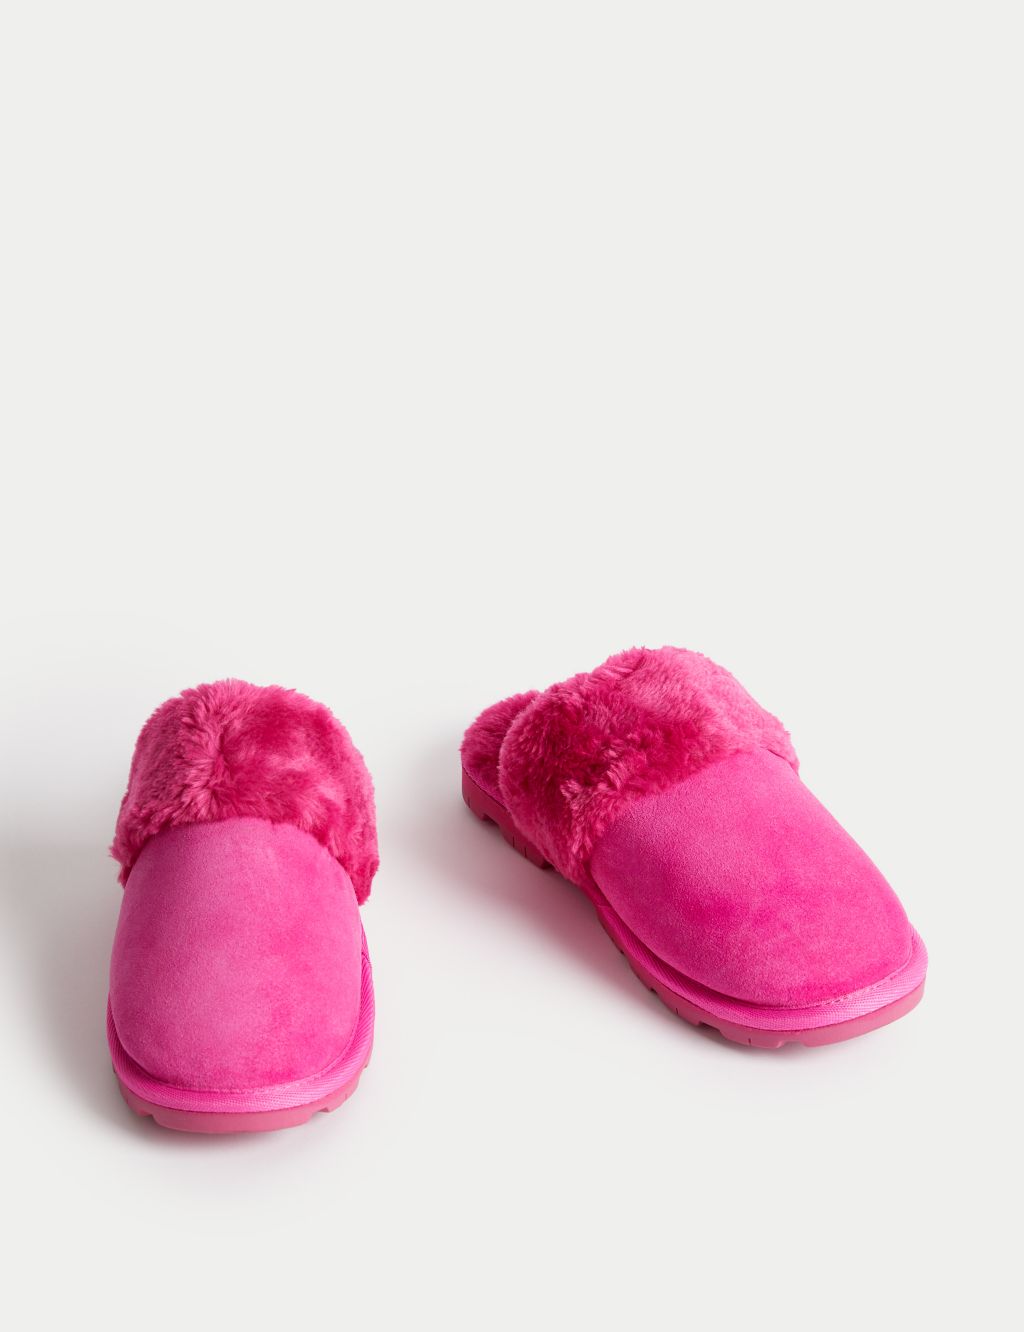 Kids' Suede Freshfeet™ Slippers (13 Small - 6 Large) image 2